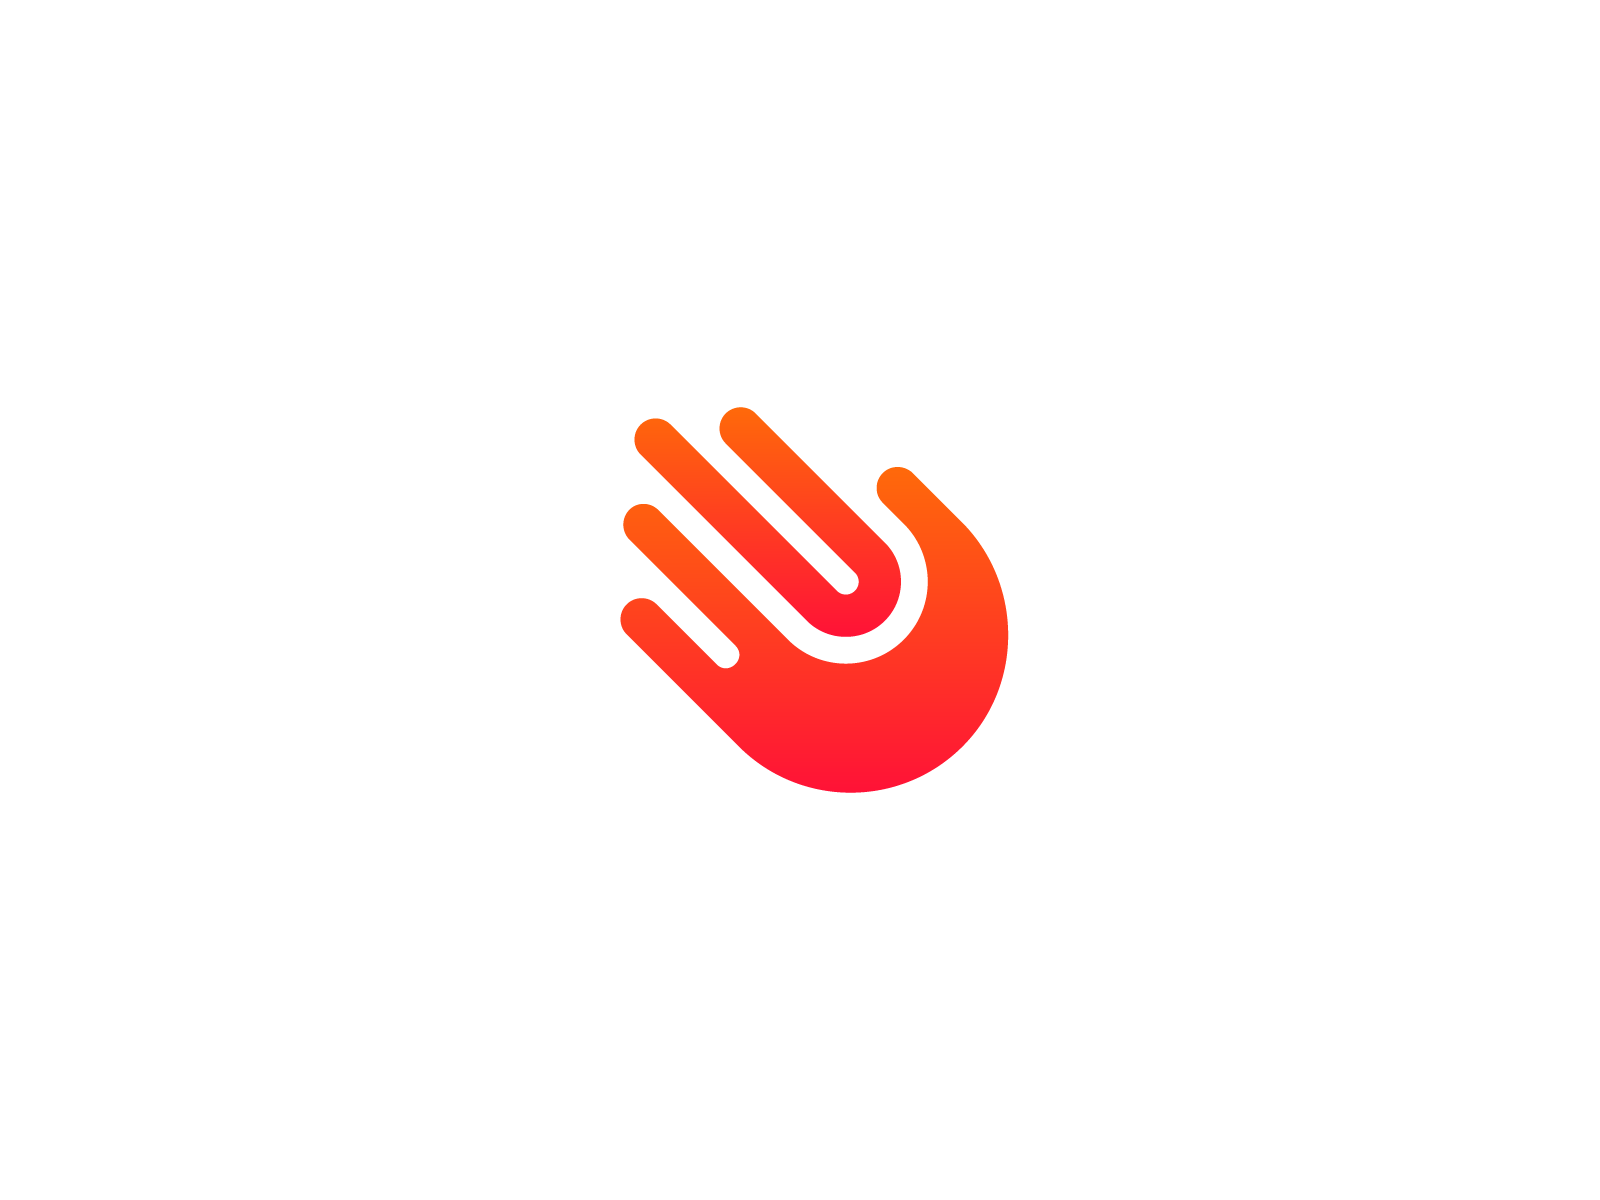 Hand + Meteor Logo by Ery Prihananto on Dribbble